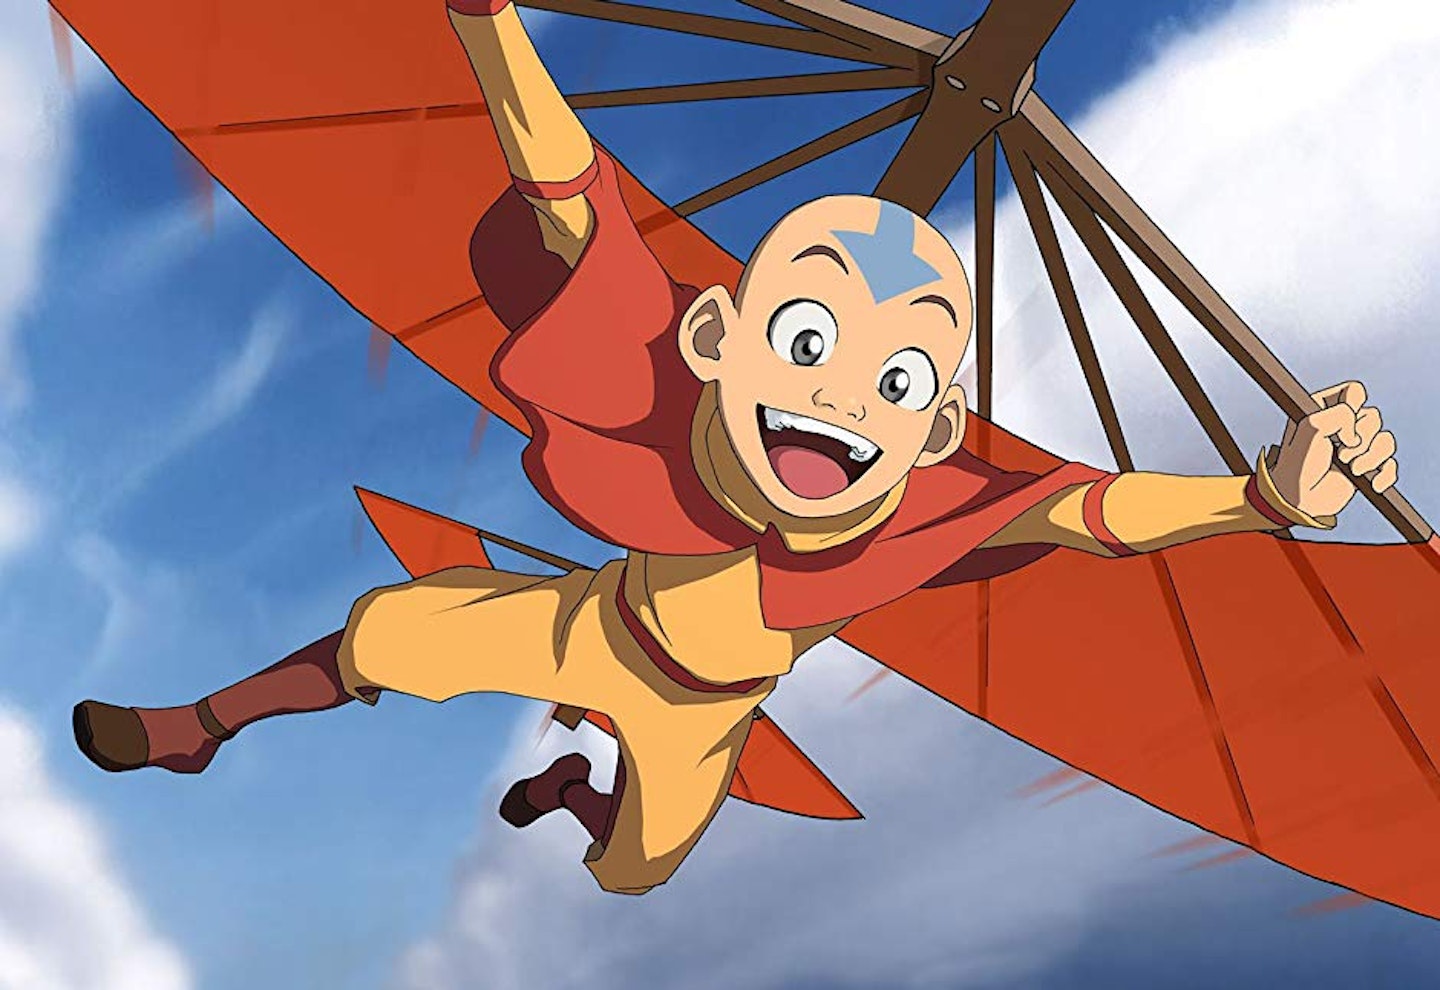 Paramount Reveals New The Last Airbender And Other Animated Movies In ...